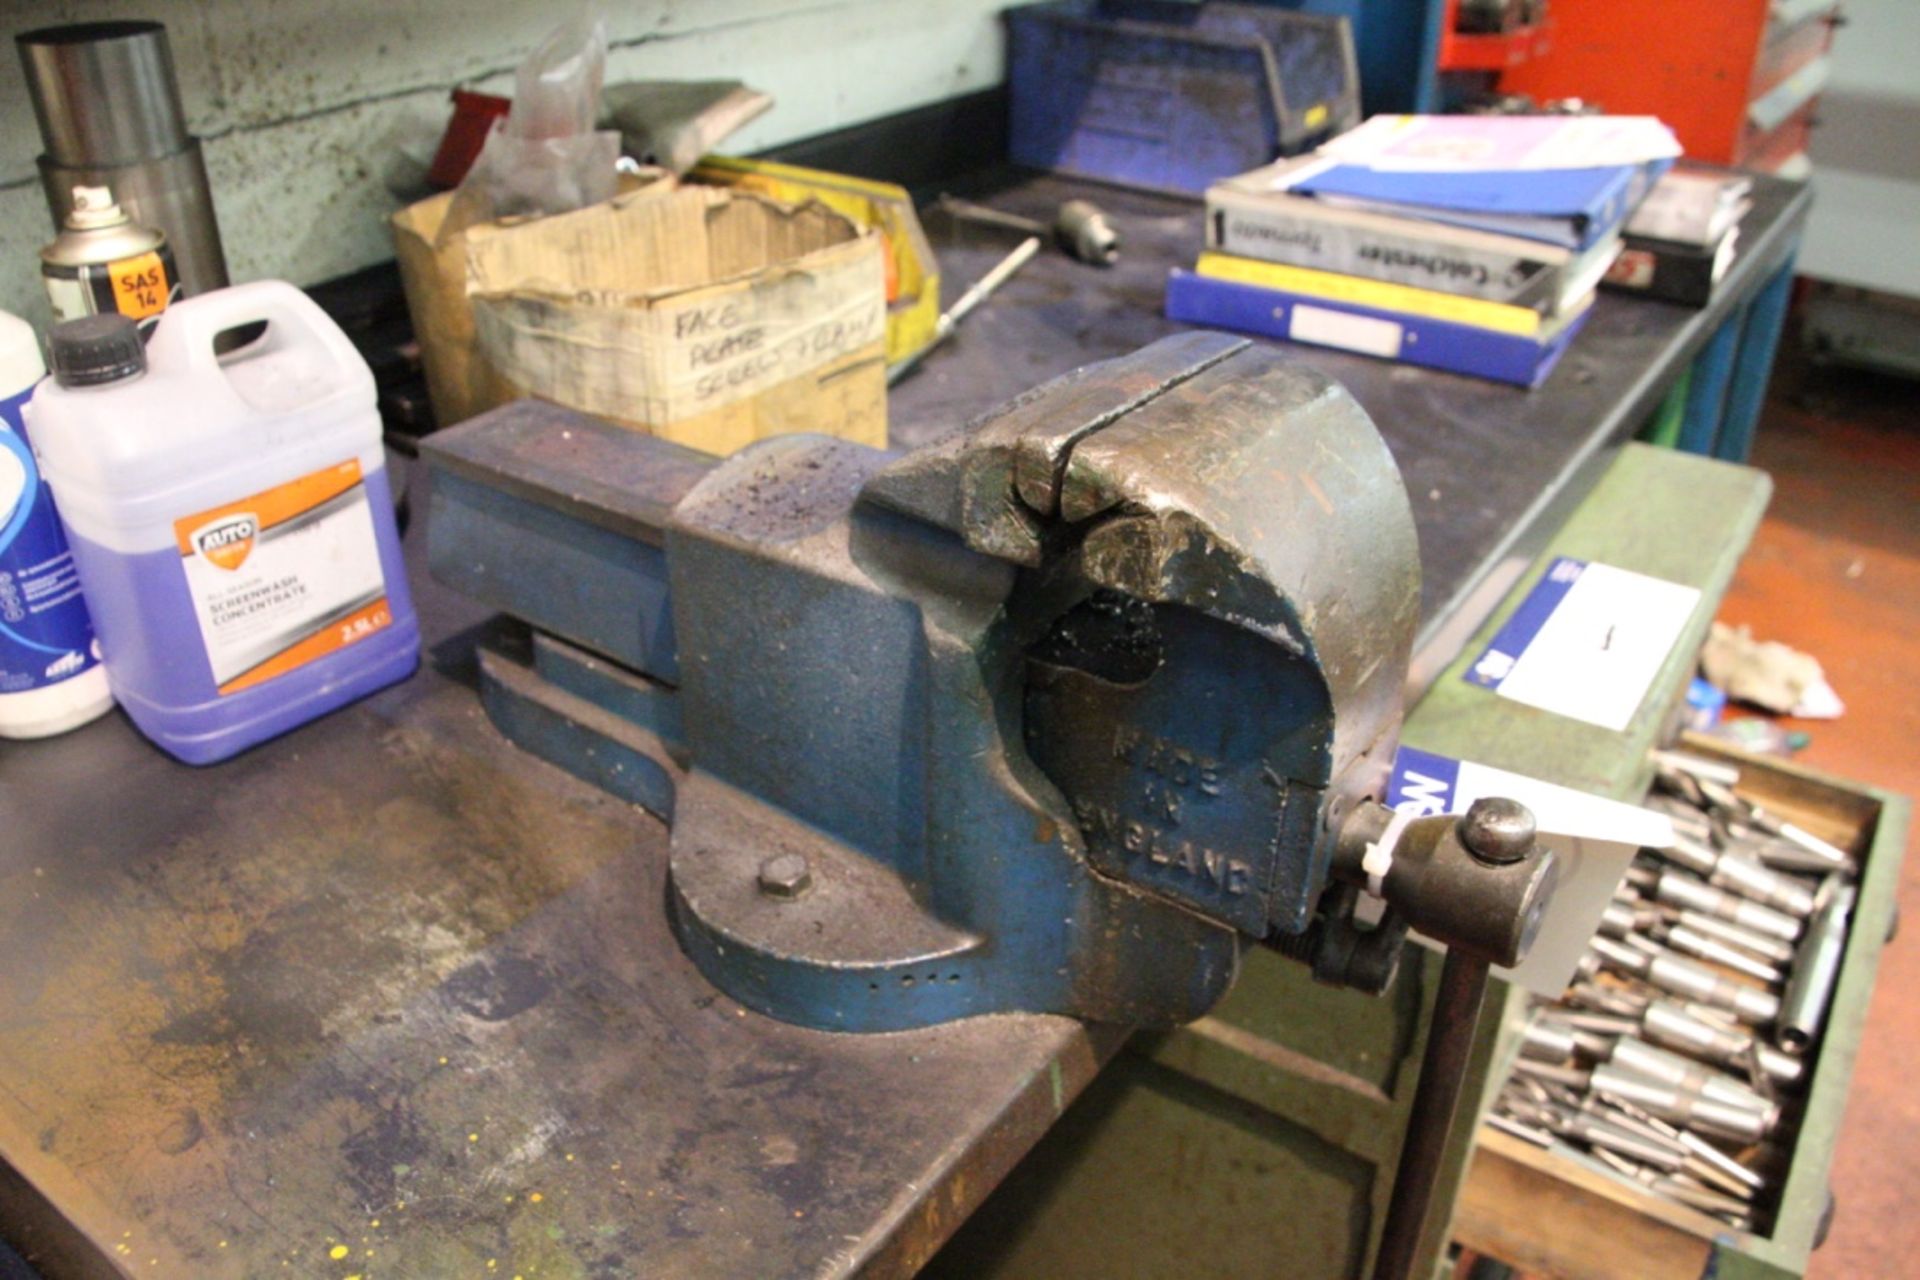 Record No. 24 125mm Jaw Engineers Bench Vice